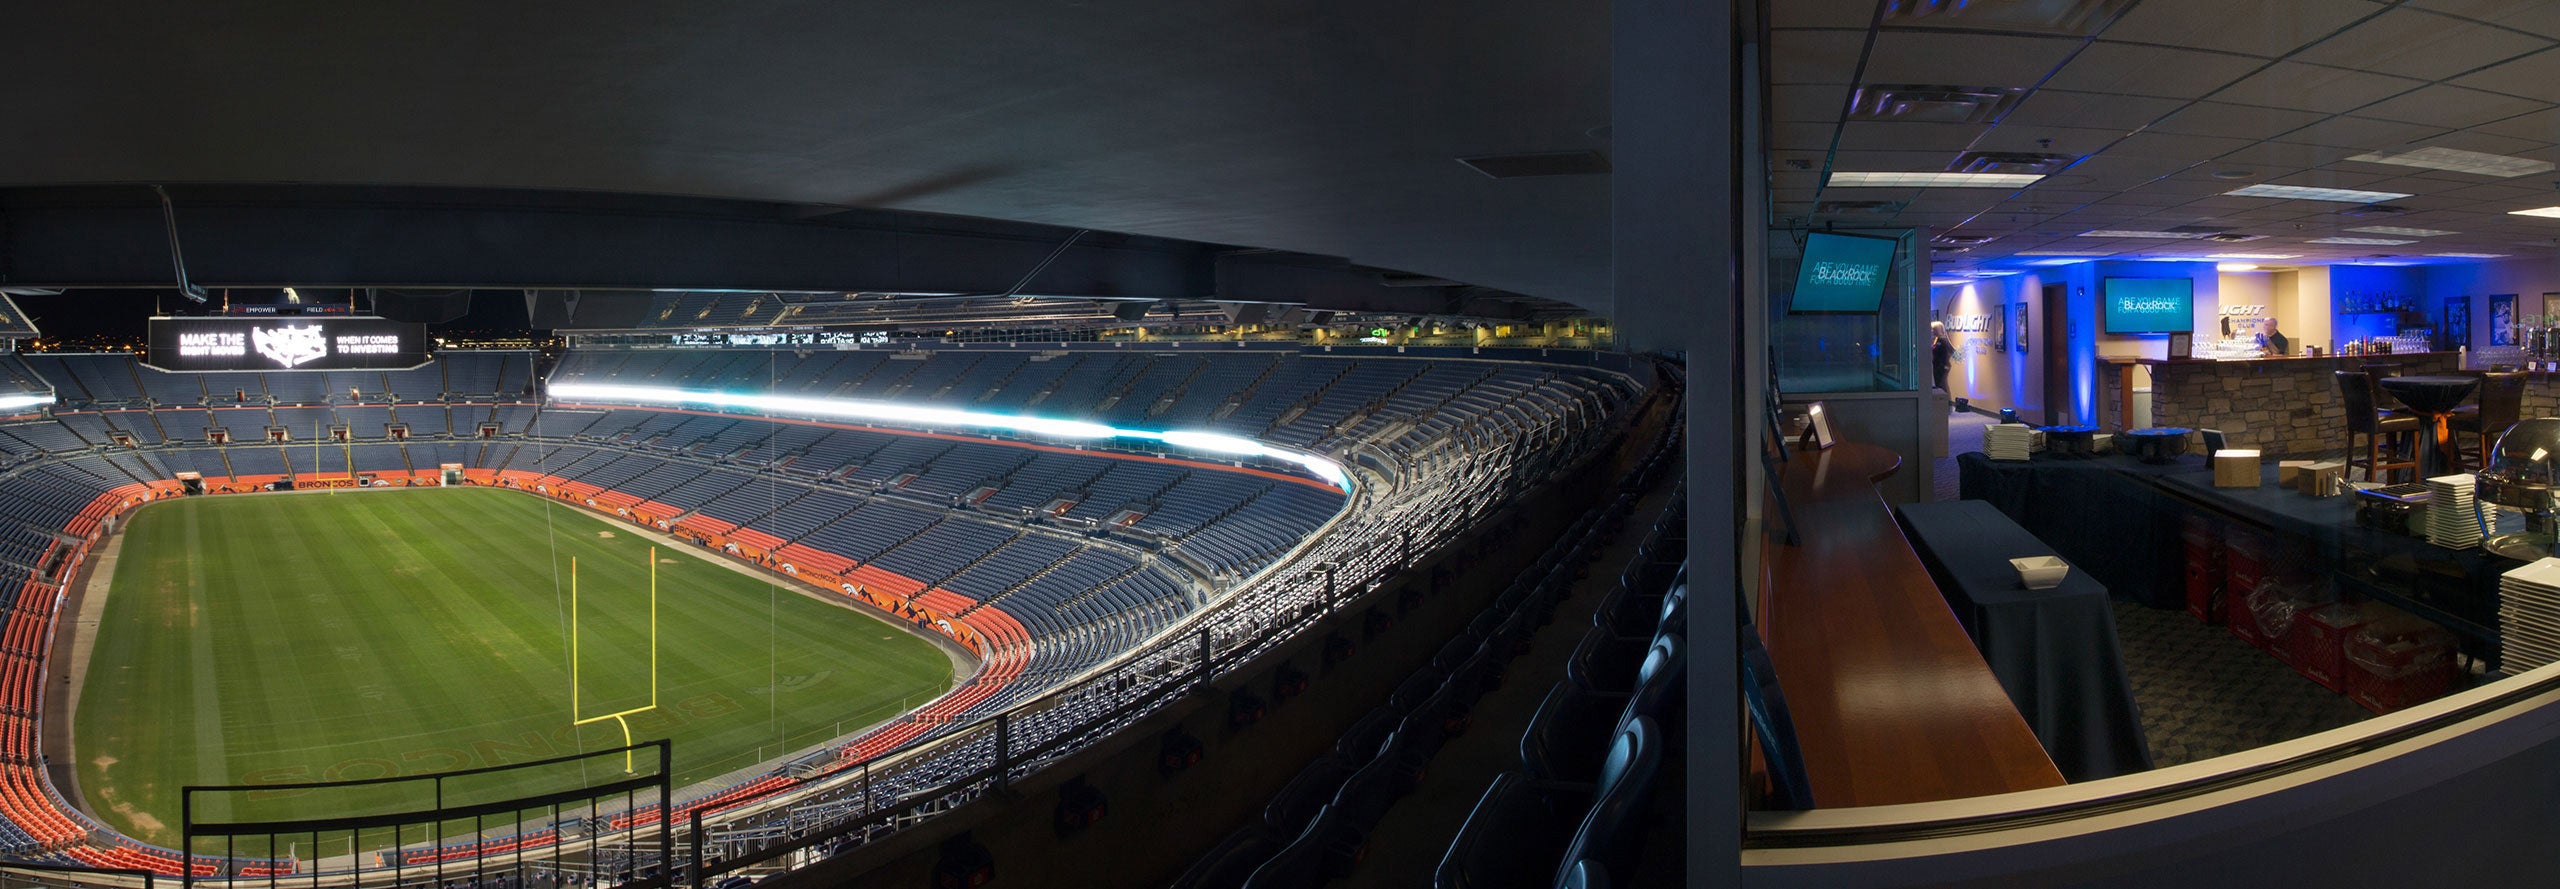 Bud Light Champions Club  Empower Field at Mile High